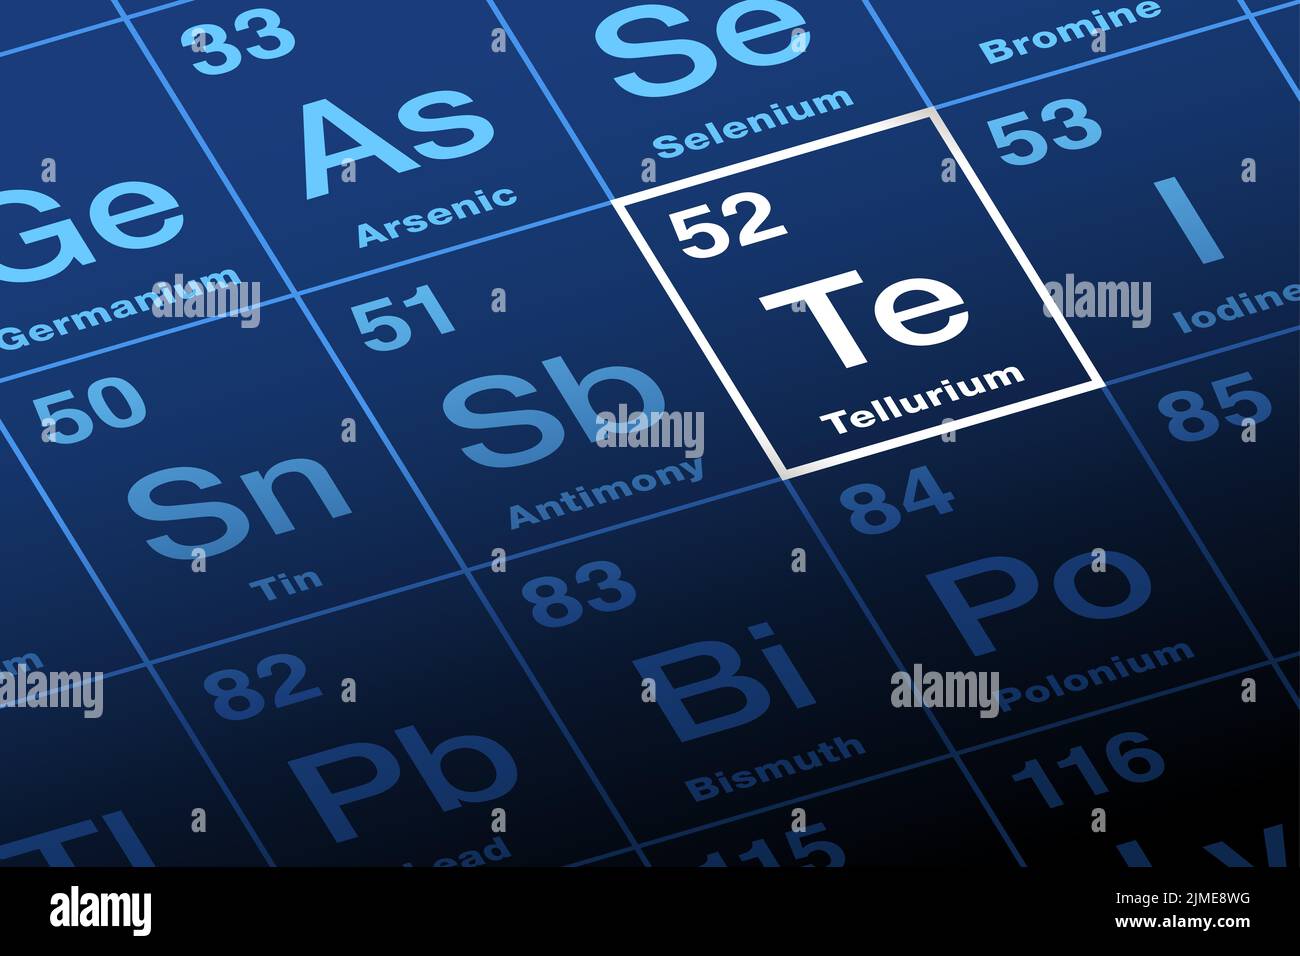 Tellurium on periodic table. Rare metalloid, chalcogen and chemical element with Symbol Te from Latin tellus for earth. Atomic number 52. Stock Photo